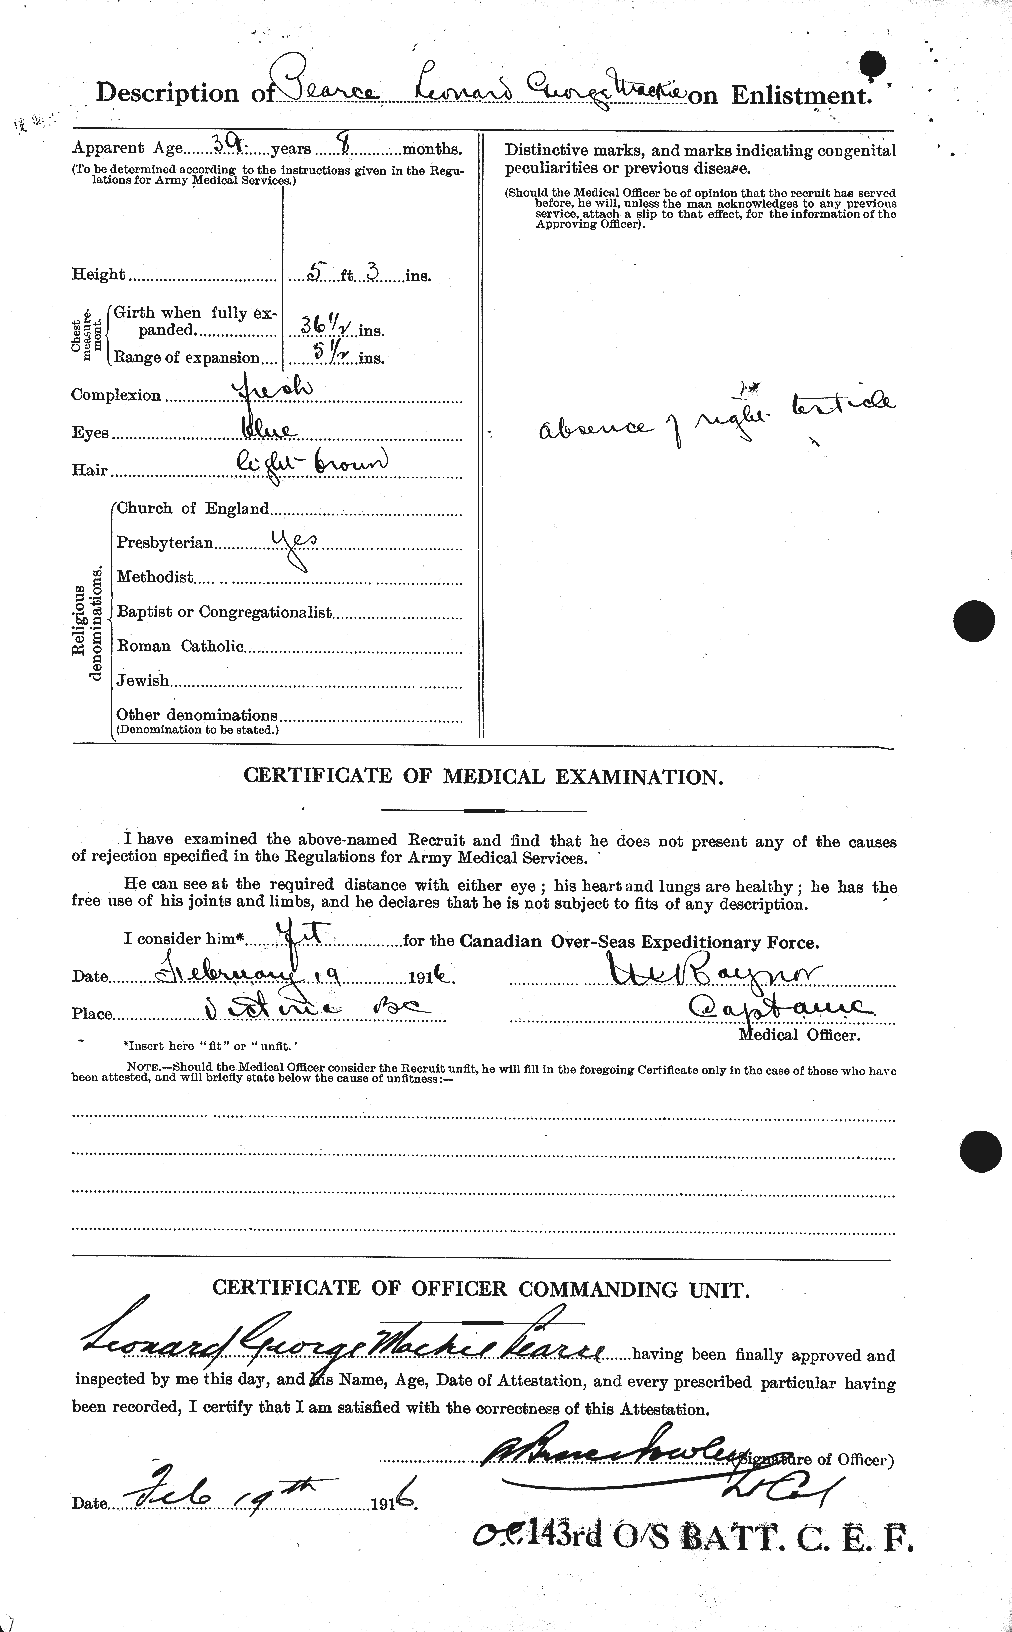 Personnel Records of the First World War - CEF 570708b